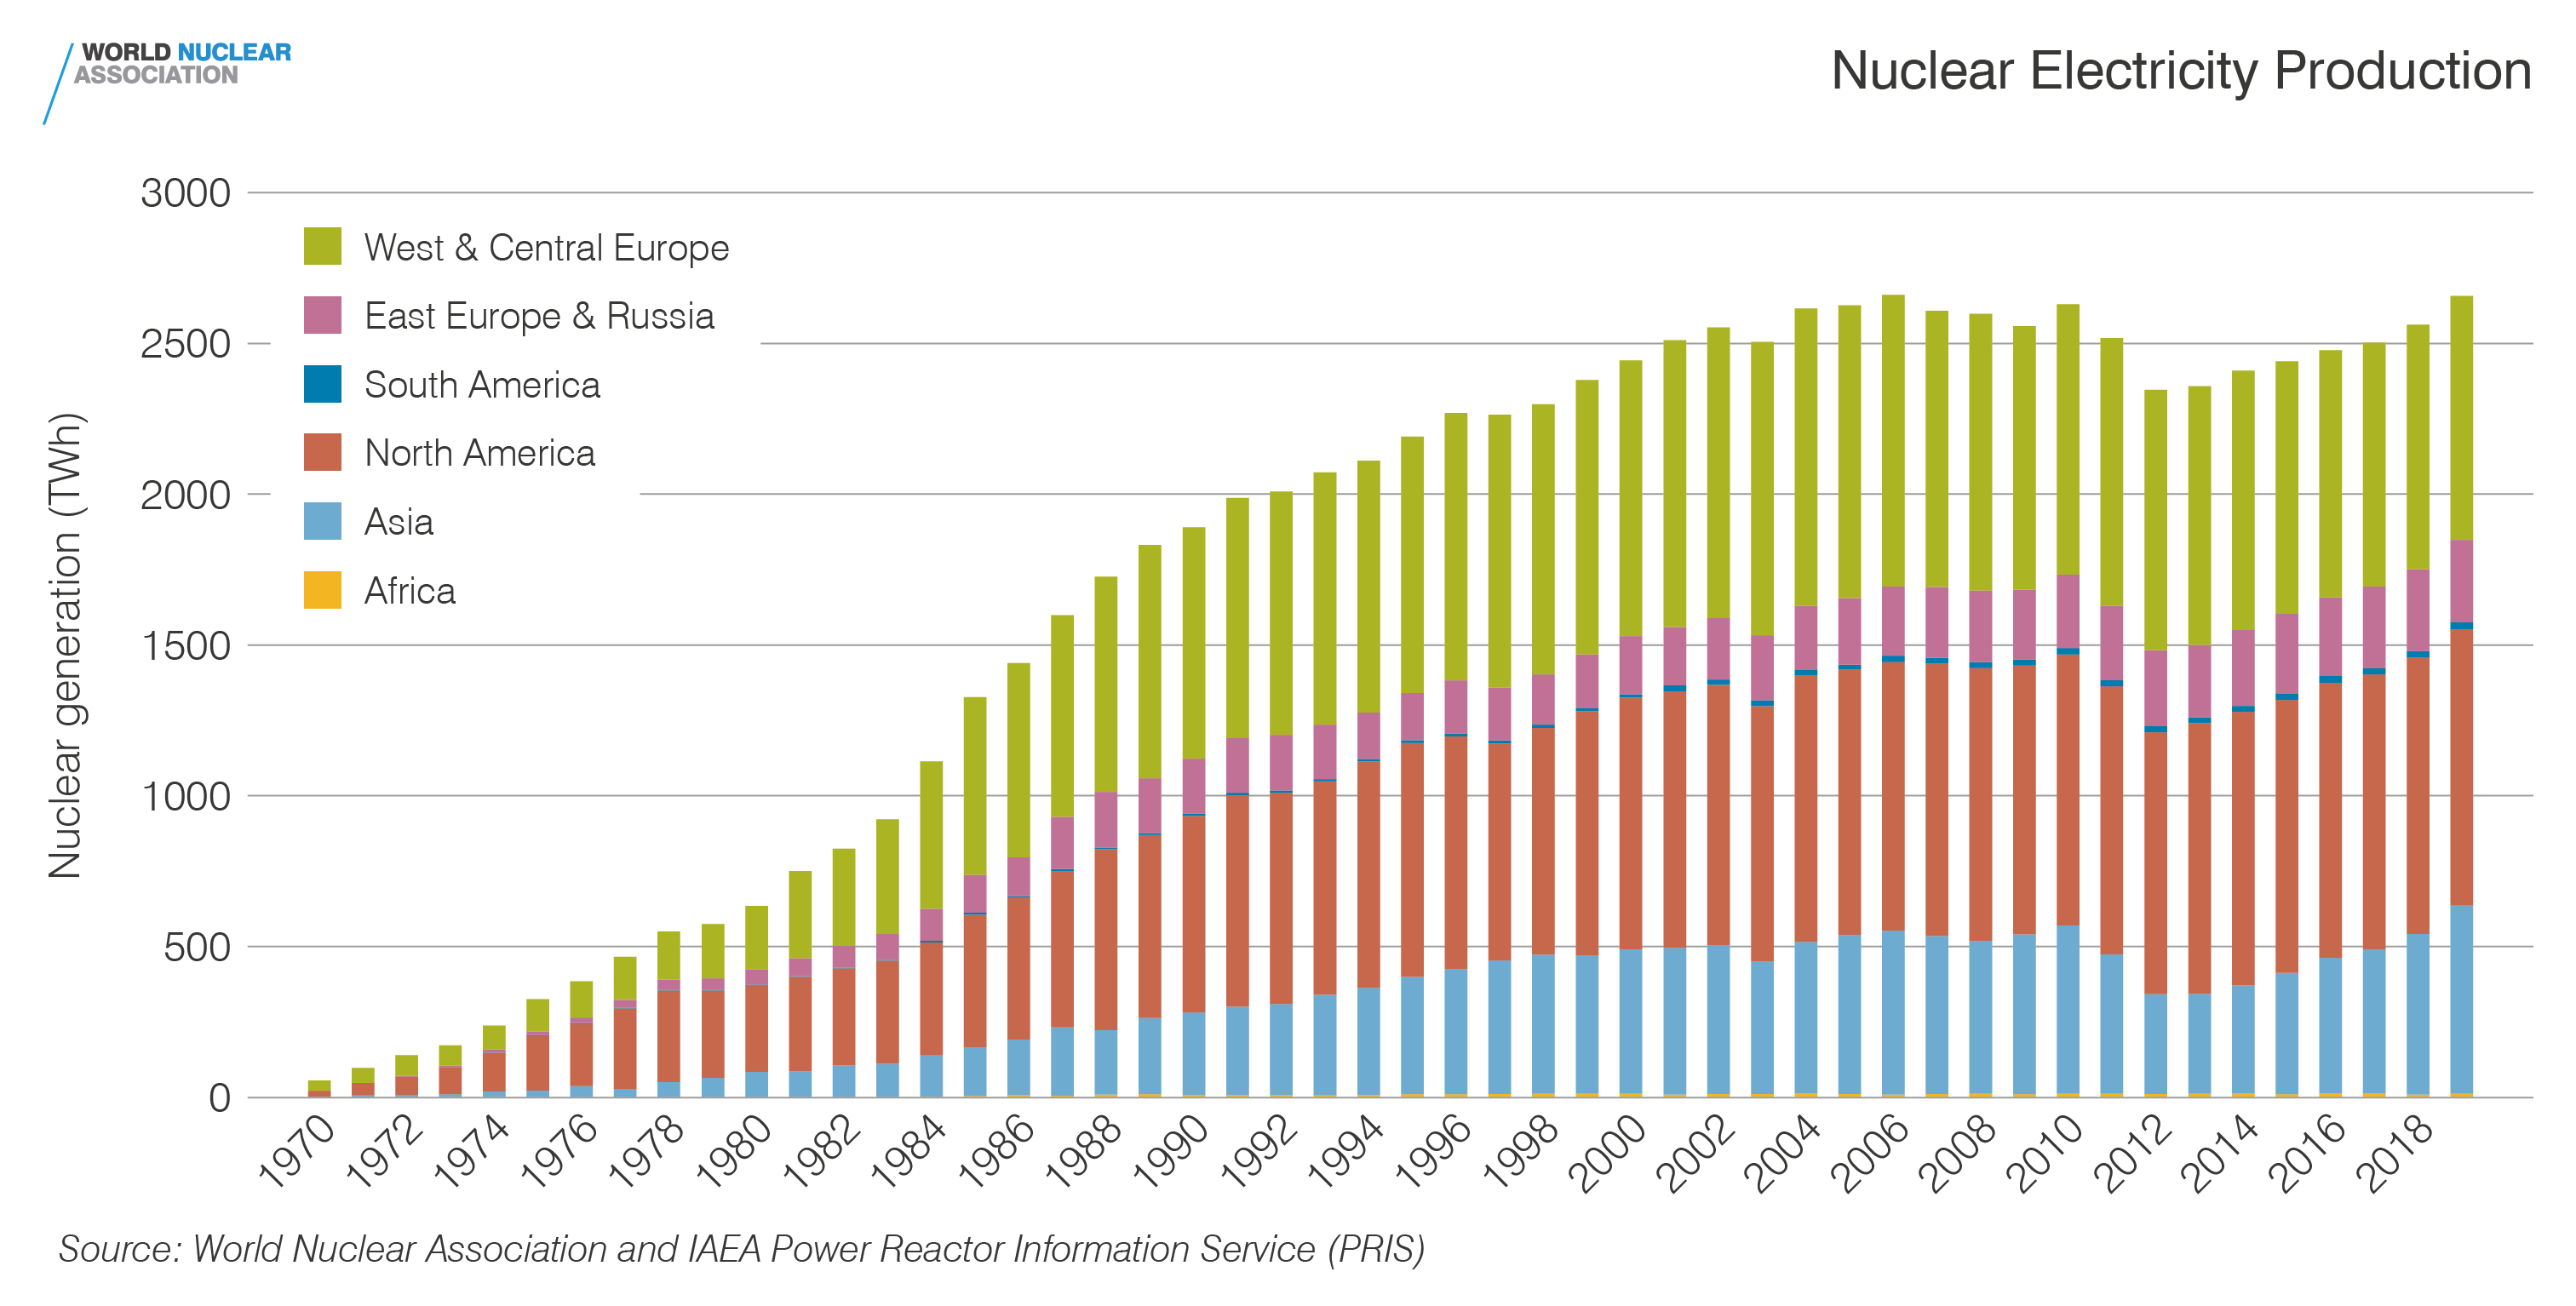 Nuclear electricity production